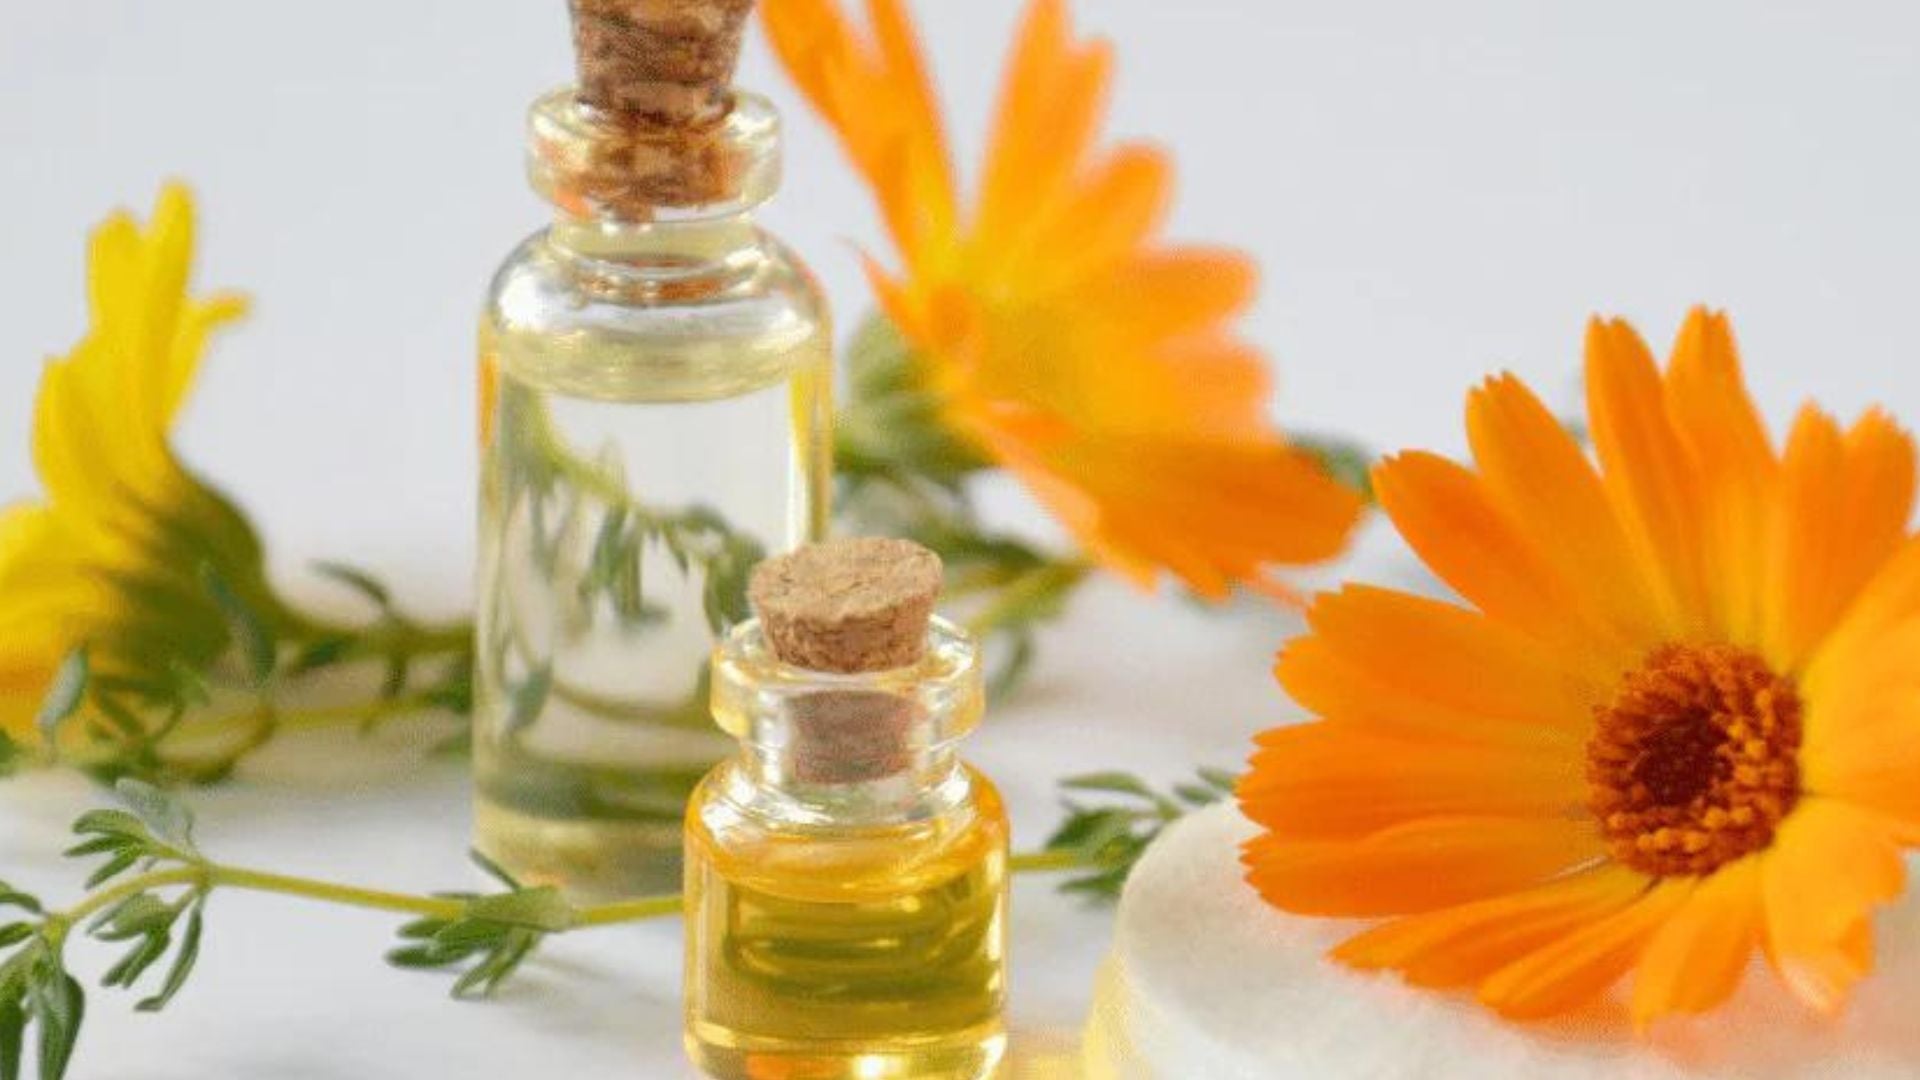 calendula flower used in skincare products